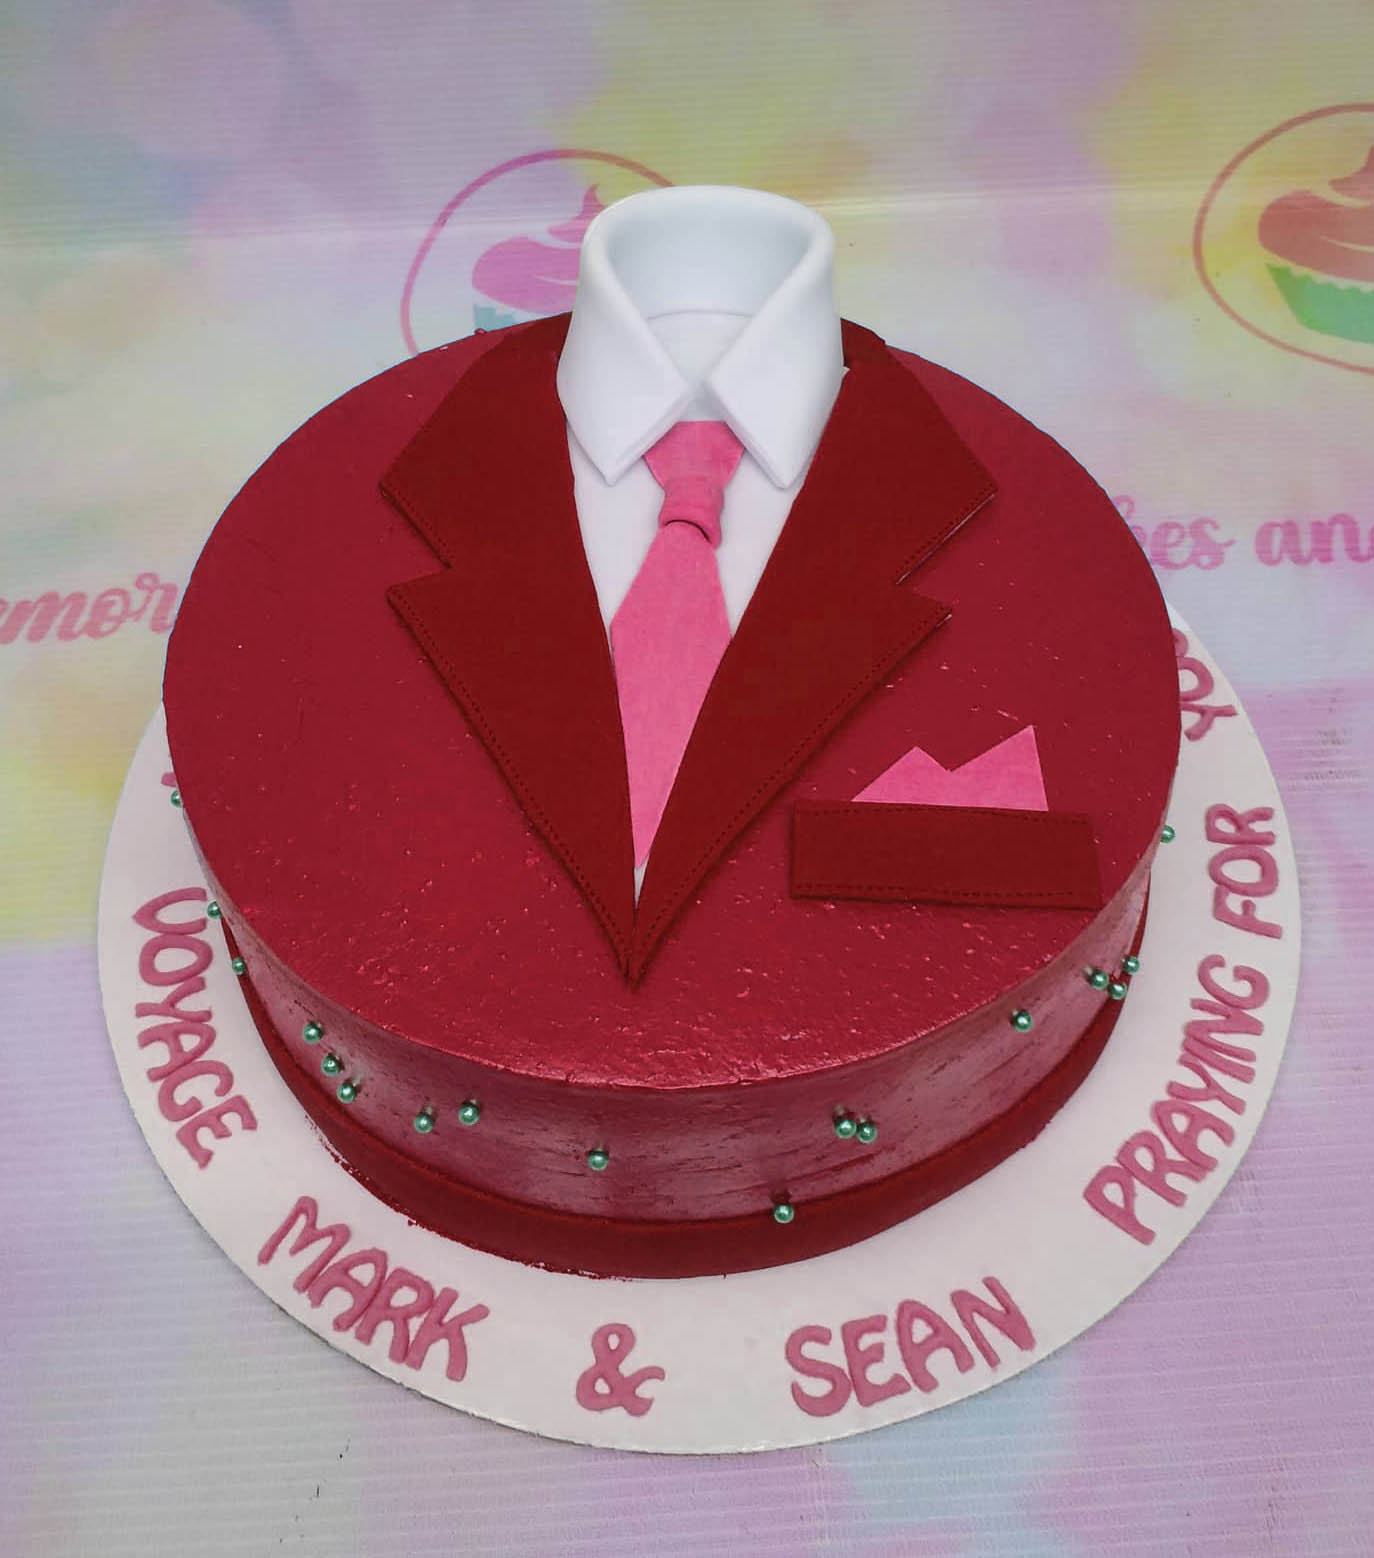 Order Tuxedo Fondant Cake 3 Kg Online at Best Price, Free Delivery|IGP Cakes